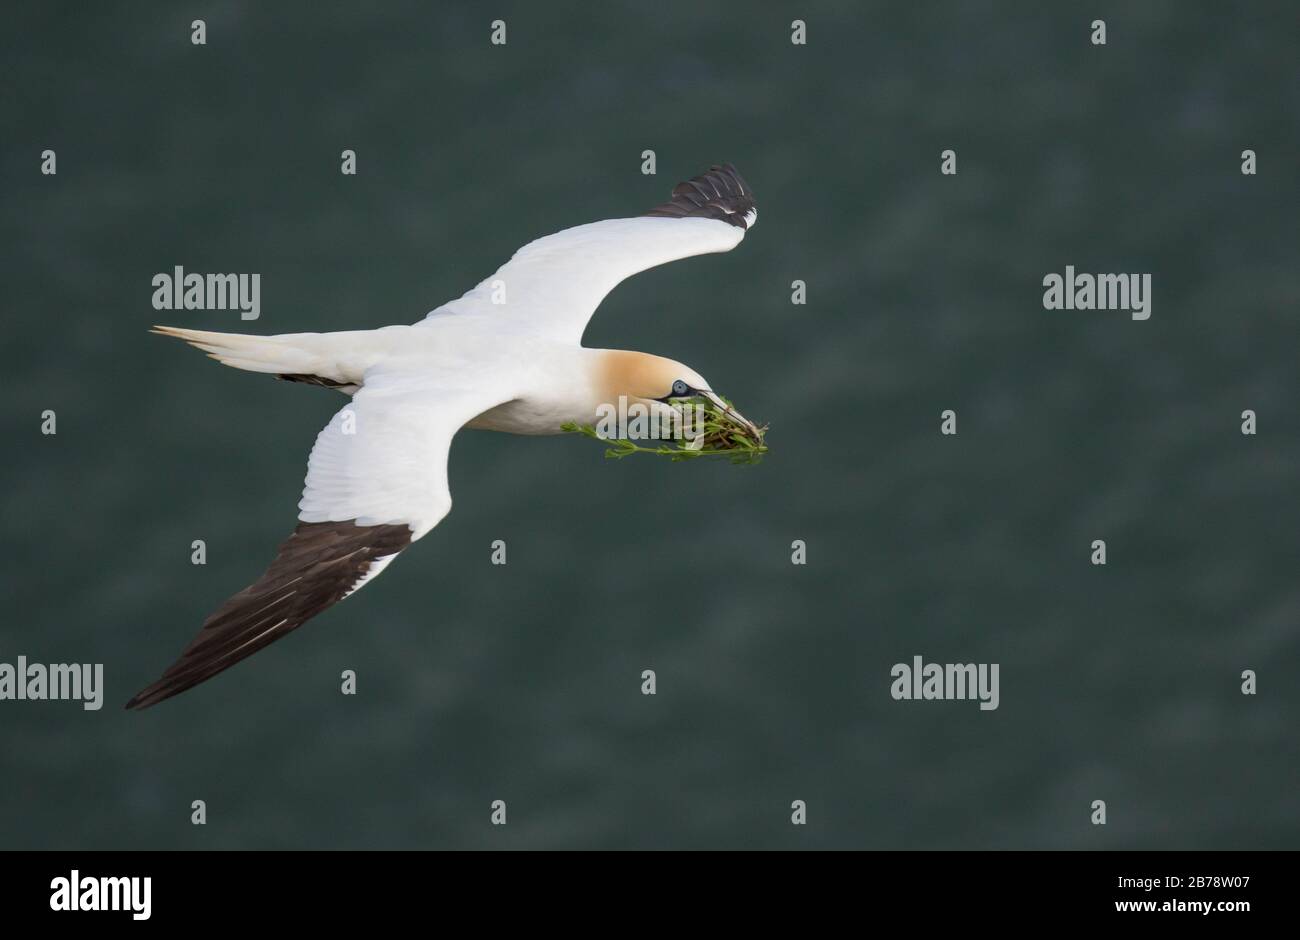 Northern gannet flying with nesting material, Bempton Cliffs nature reserve, East Yorkshire, England, UK Stock Photo